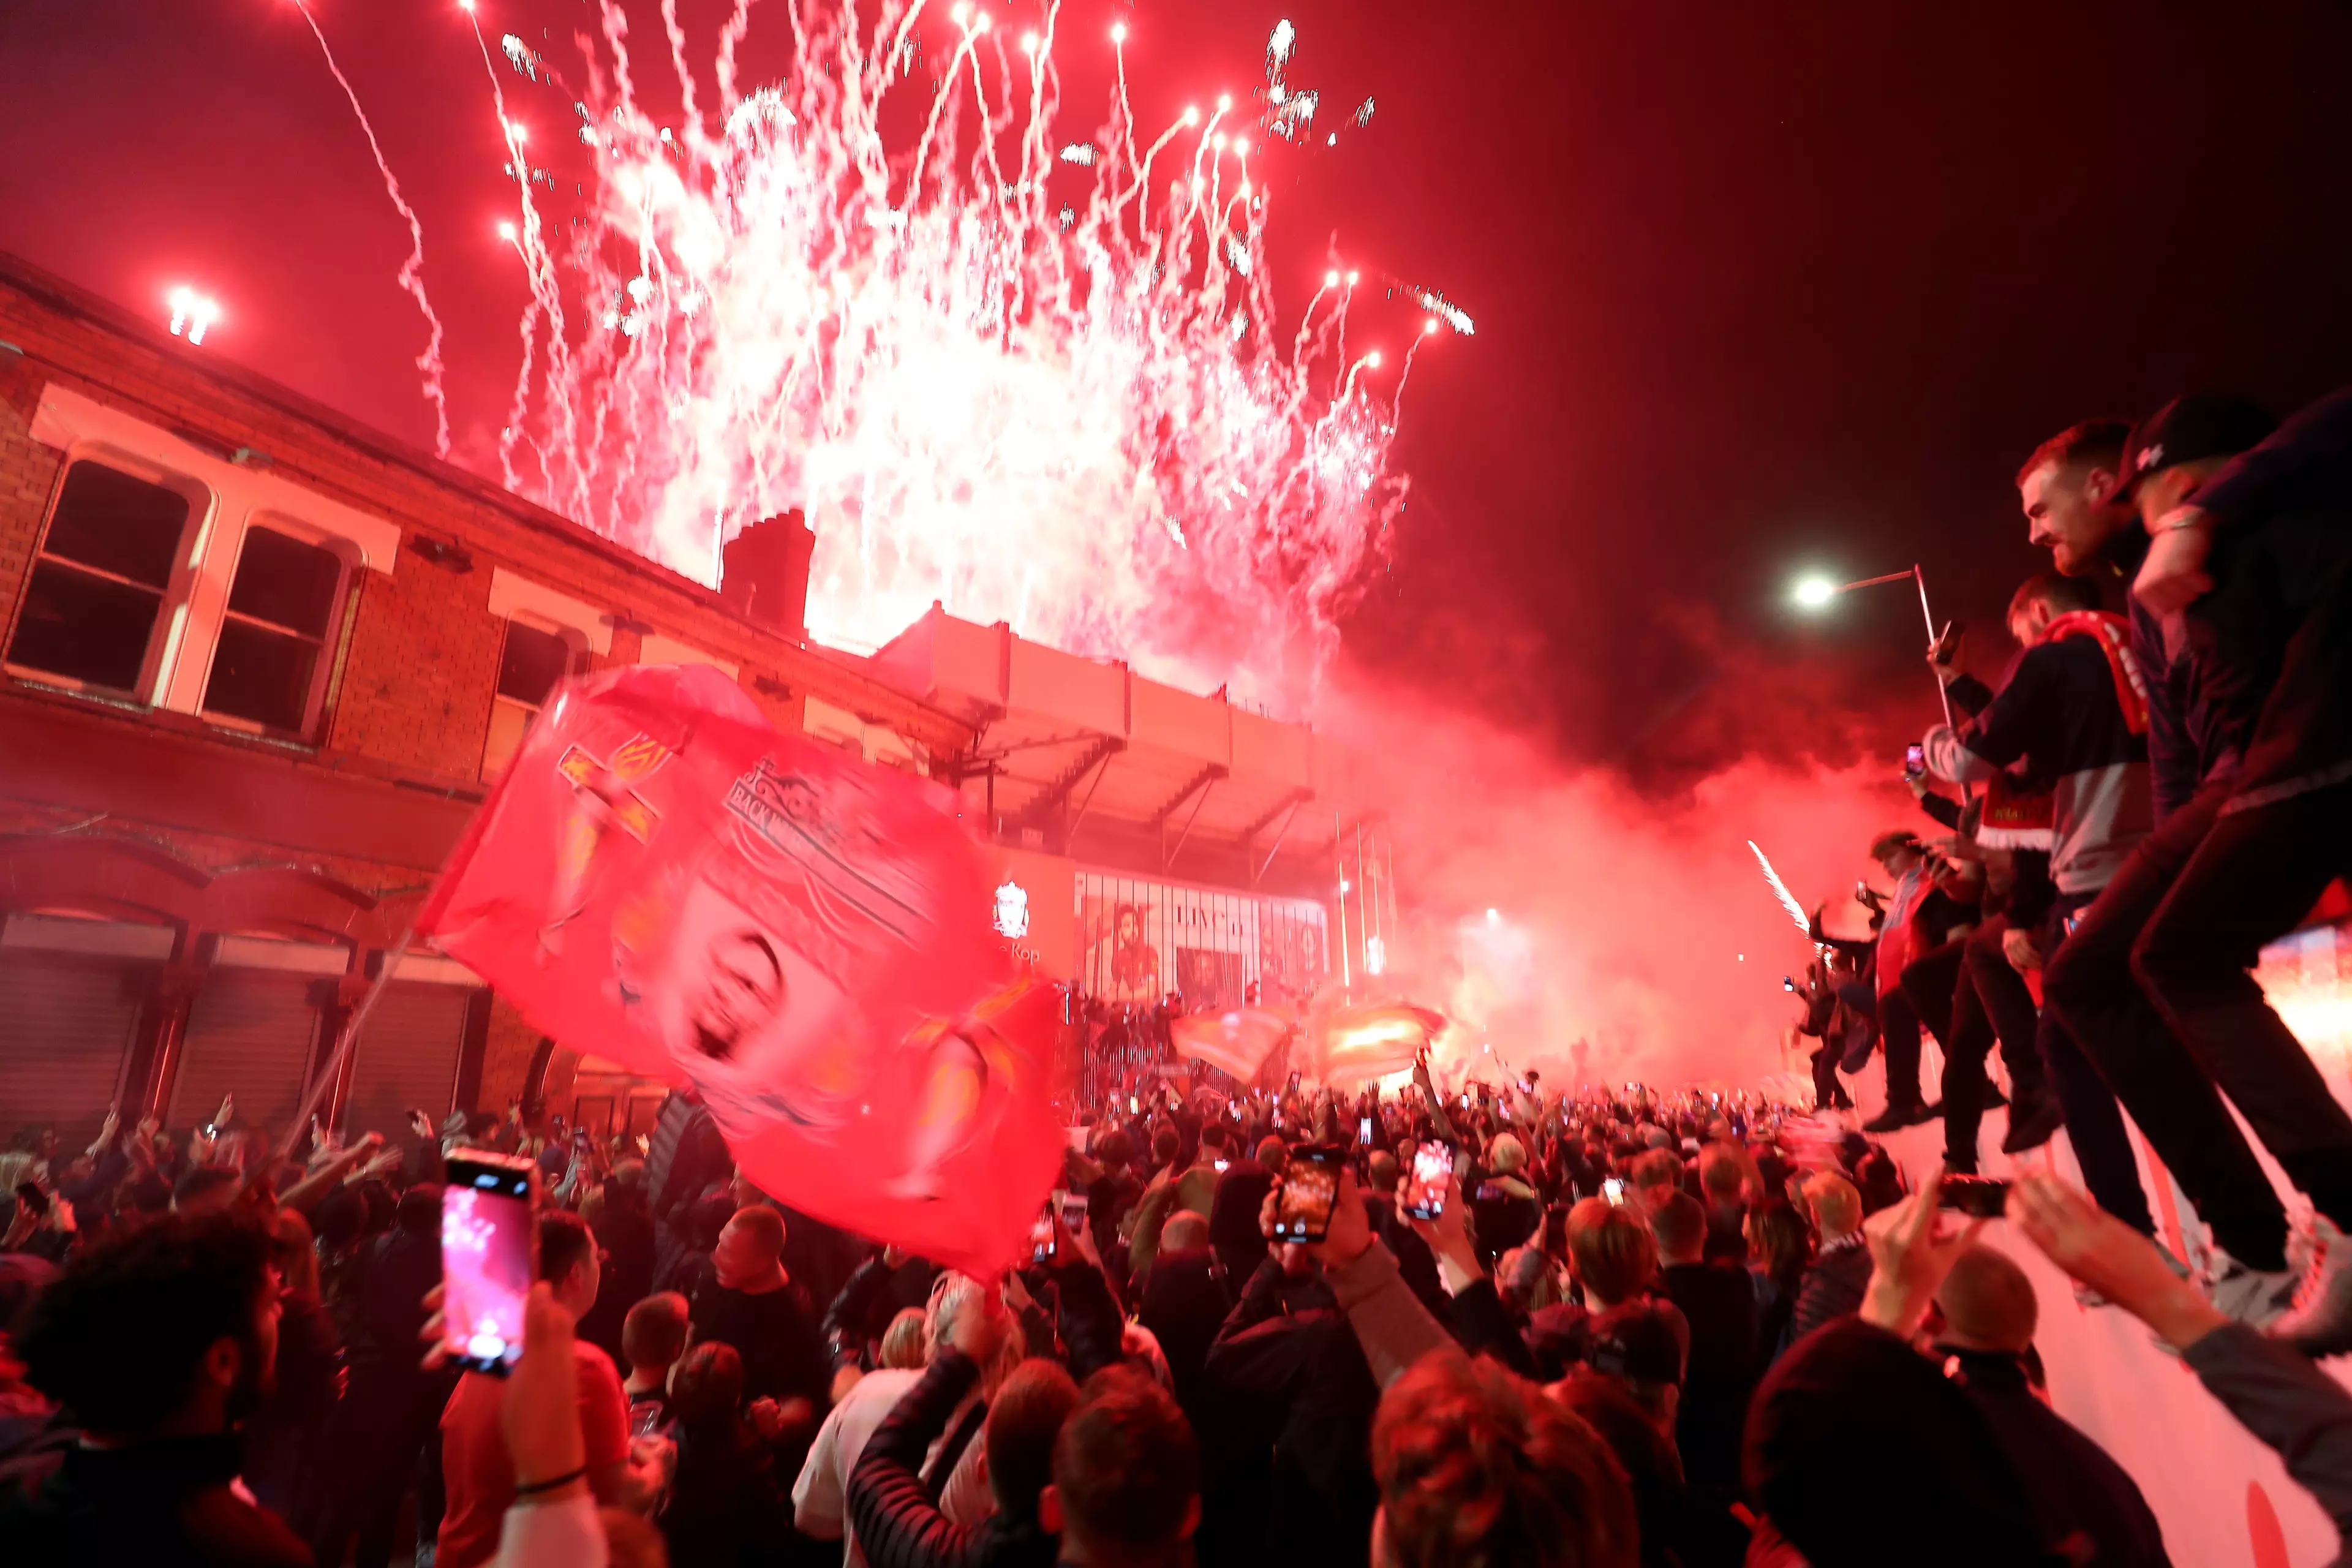 Liverpool fans were also criticised for taking to the streets to celebrate their Premier League title last year. Image: PA Images